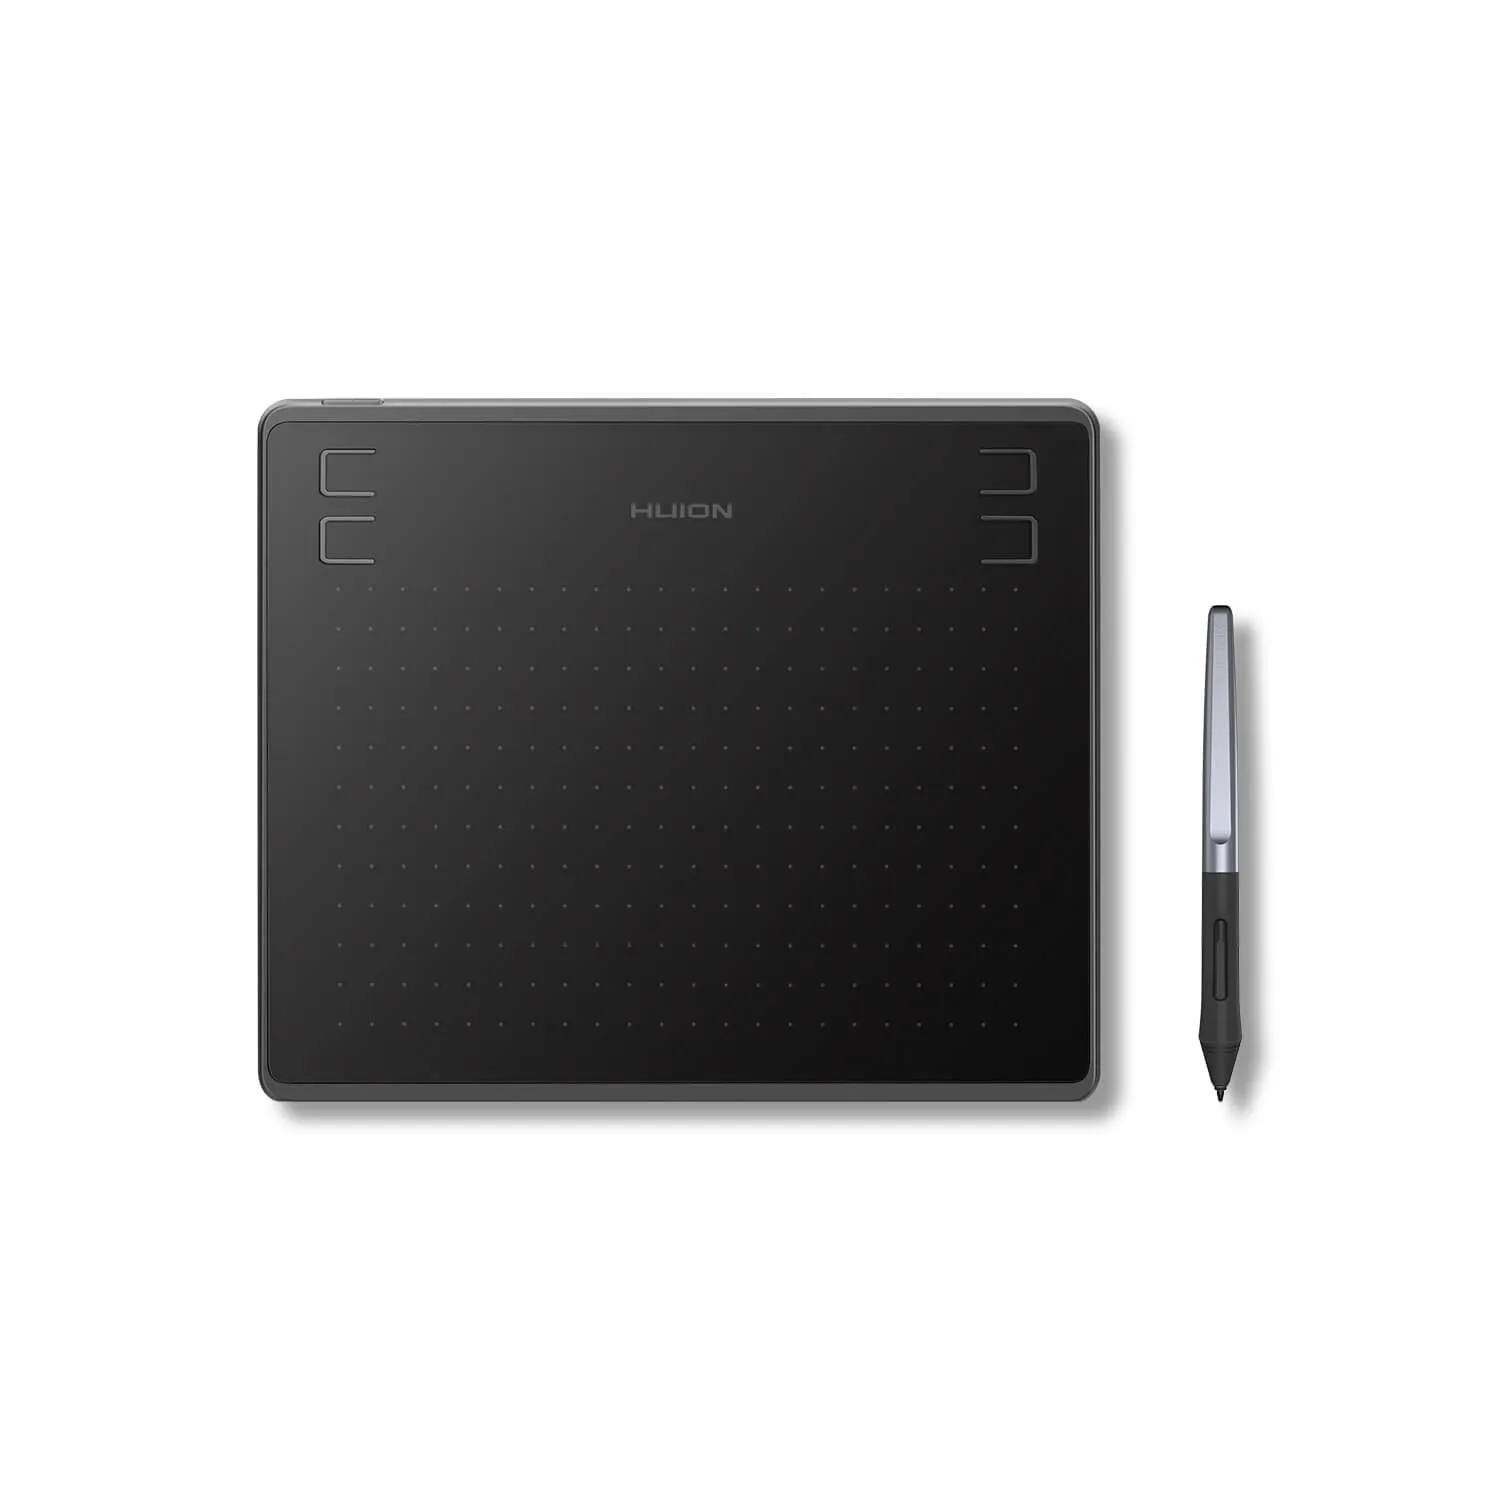 Huion Inspiroy H610X Medium Size Graphics Digital Drawing Tablet  Huion  Official Store: Drawing Tablets, Pen Tablets, Pen Display, Led Light Pad